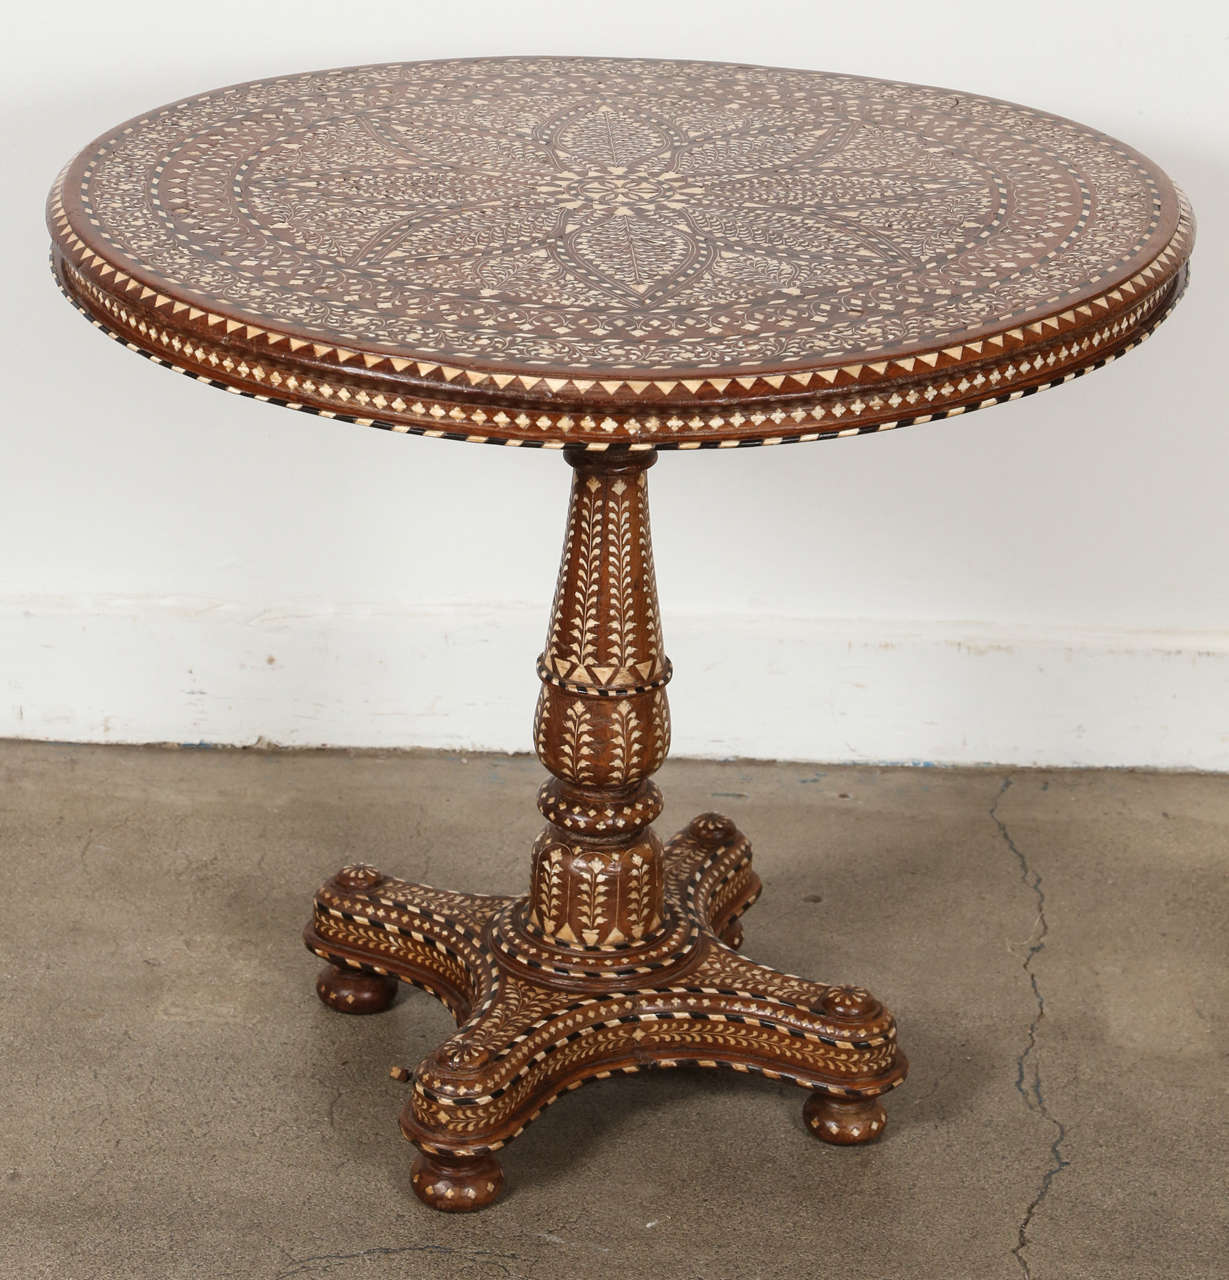 Rare large 19th century Anglo Indian extensively rosewood inlaid with bone round table with finely turned stem and legs. The heavily well detailed bone inlay covers both the top and stem, as well as the legs. Could be used as a center table or small